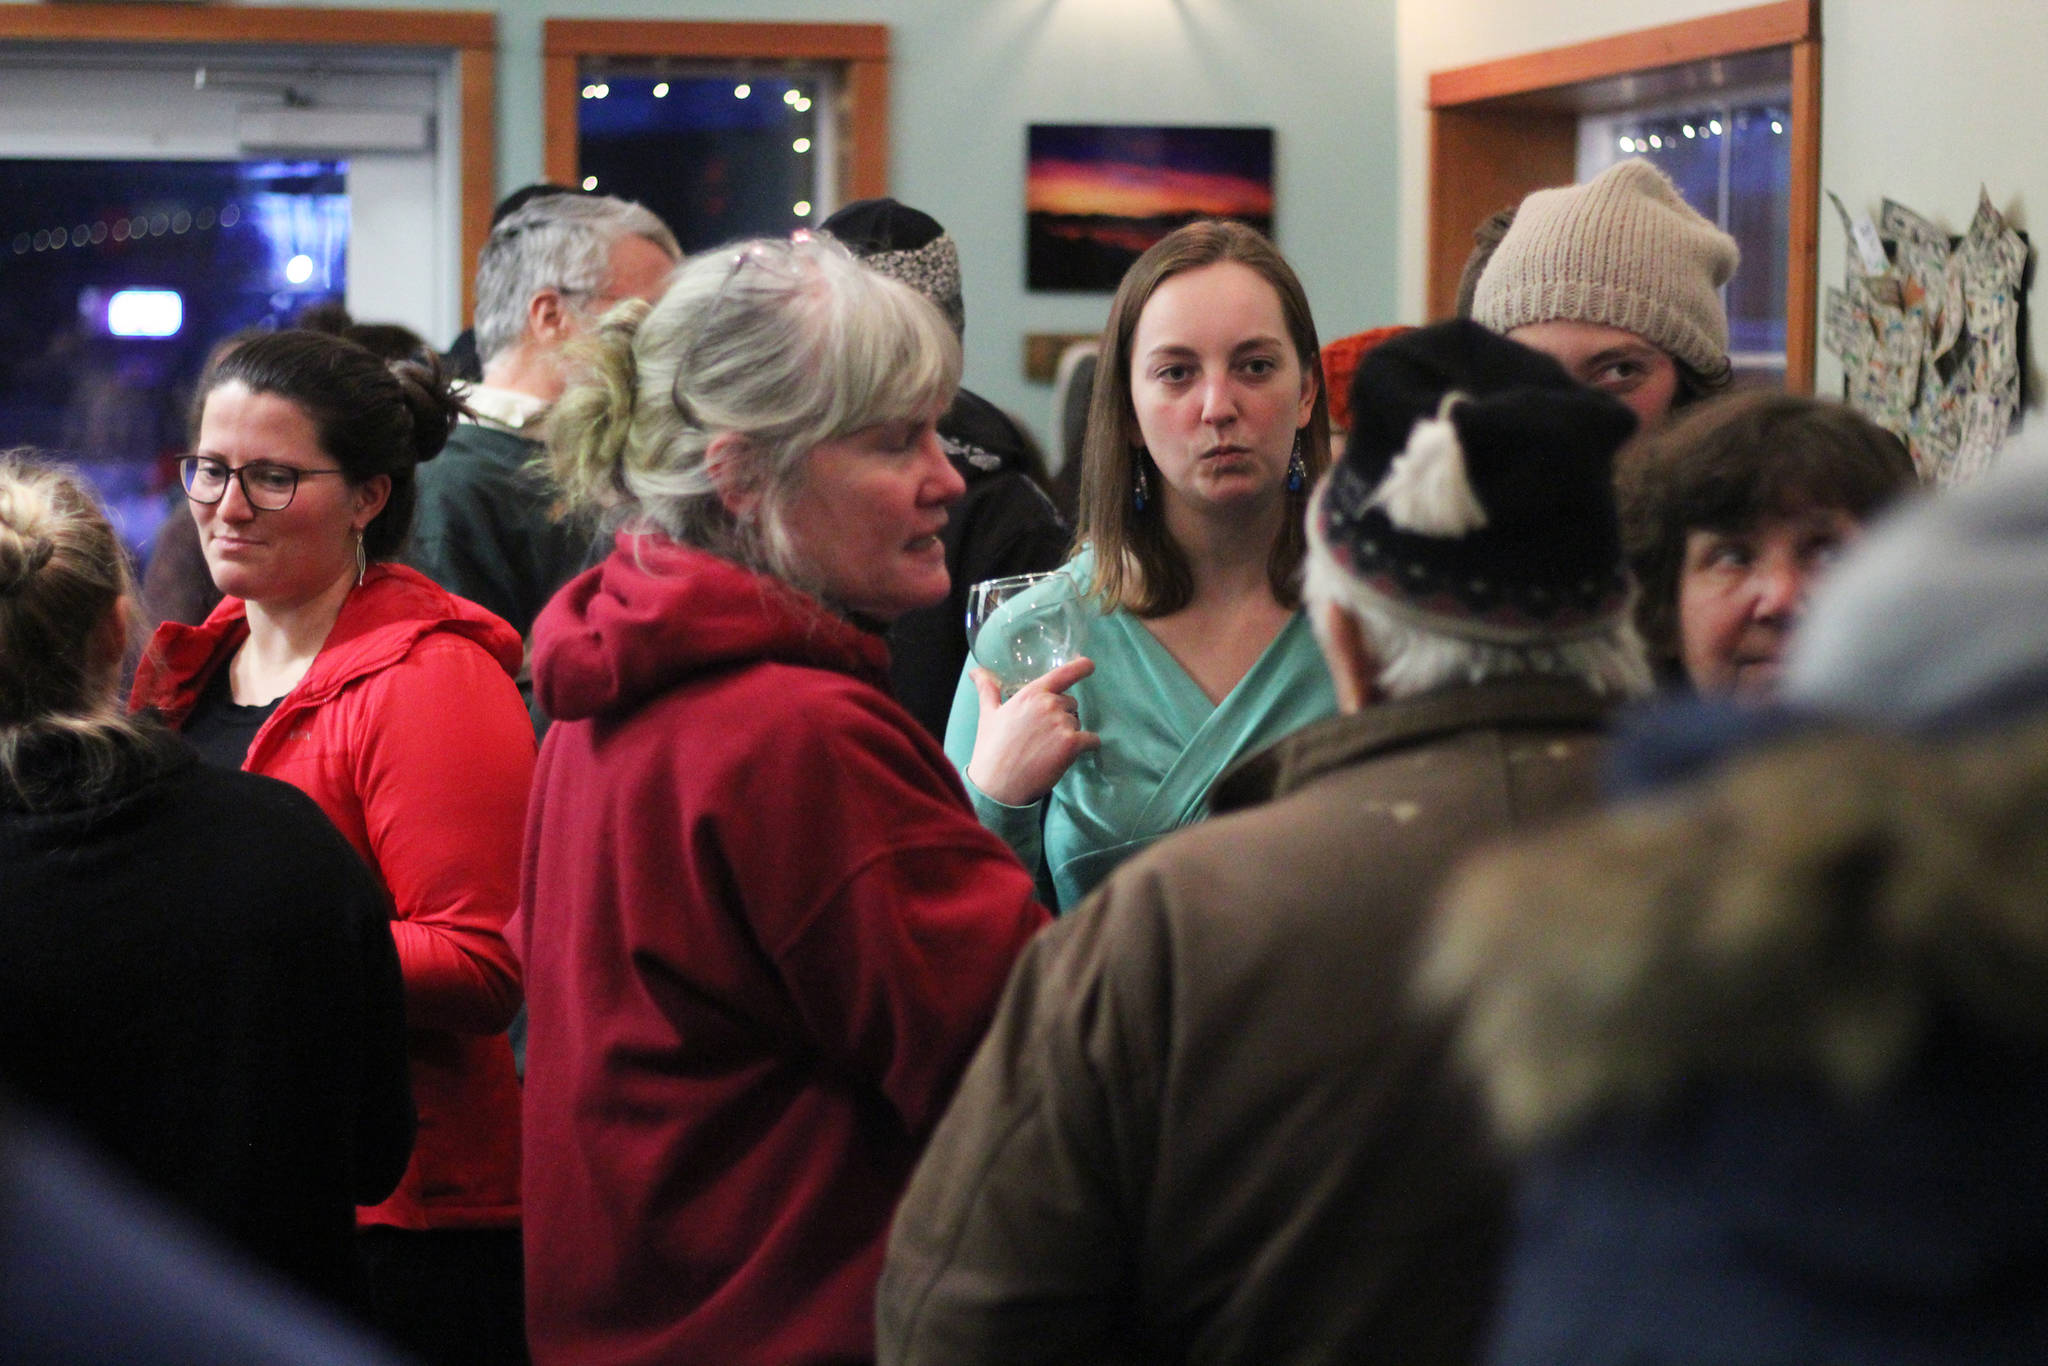 Photo by Megan Pacer/Homer News                                 A crowd of people talks and mingles at the First Friday opening Friday, Feb. 1, 2019 at Grace Ridge Brewery in Homer, Alaska. The winning label for a special Brackish Brown ale was unveiled at the event.